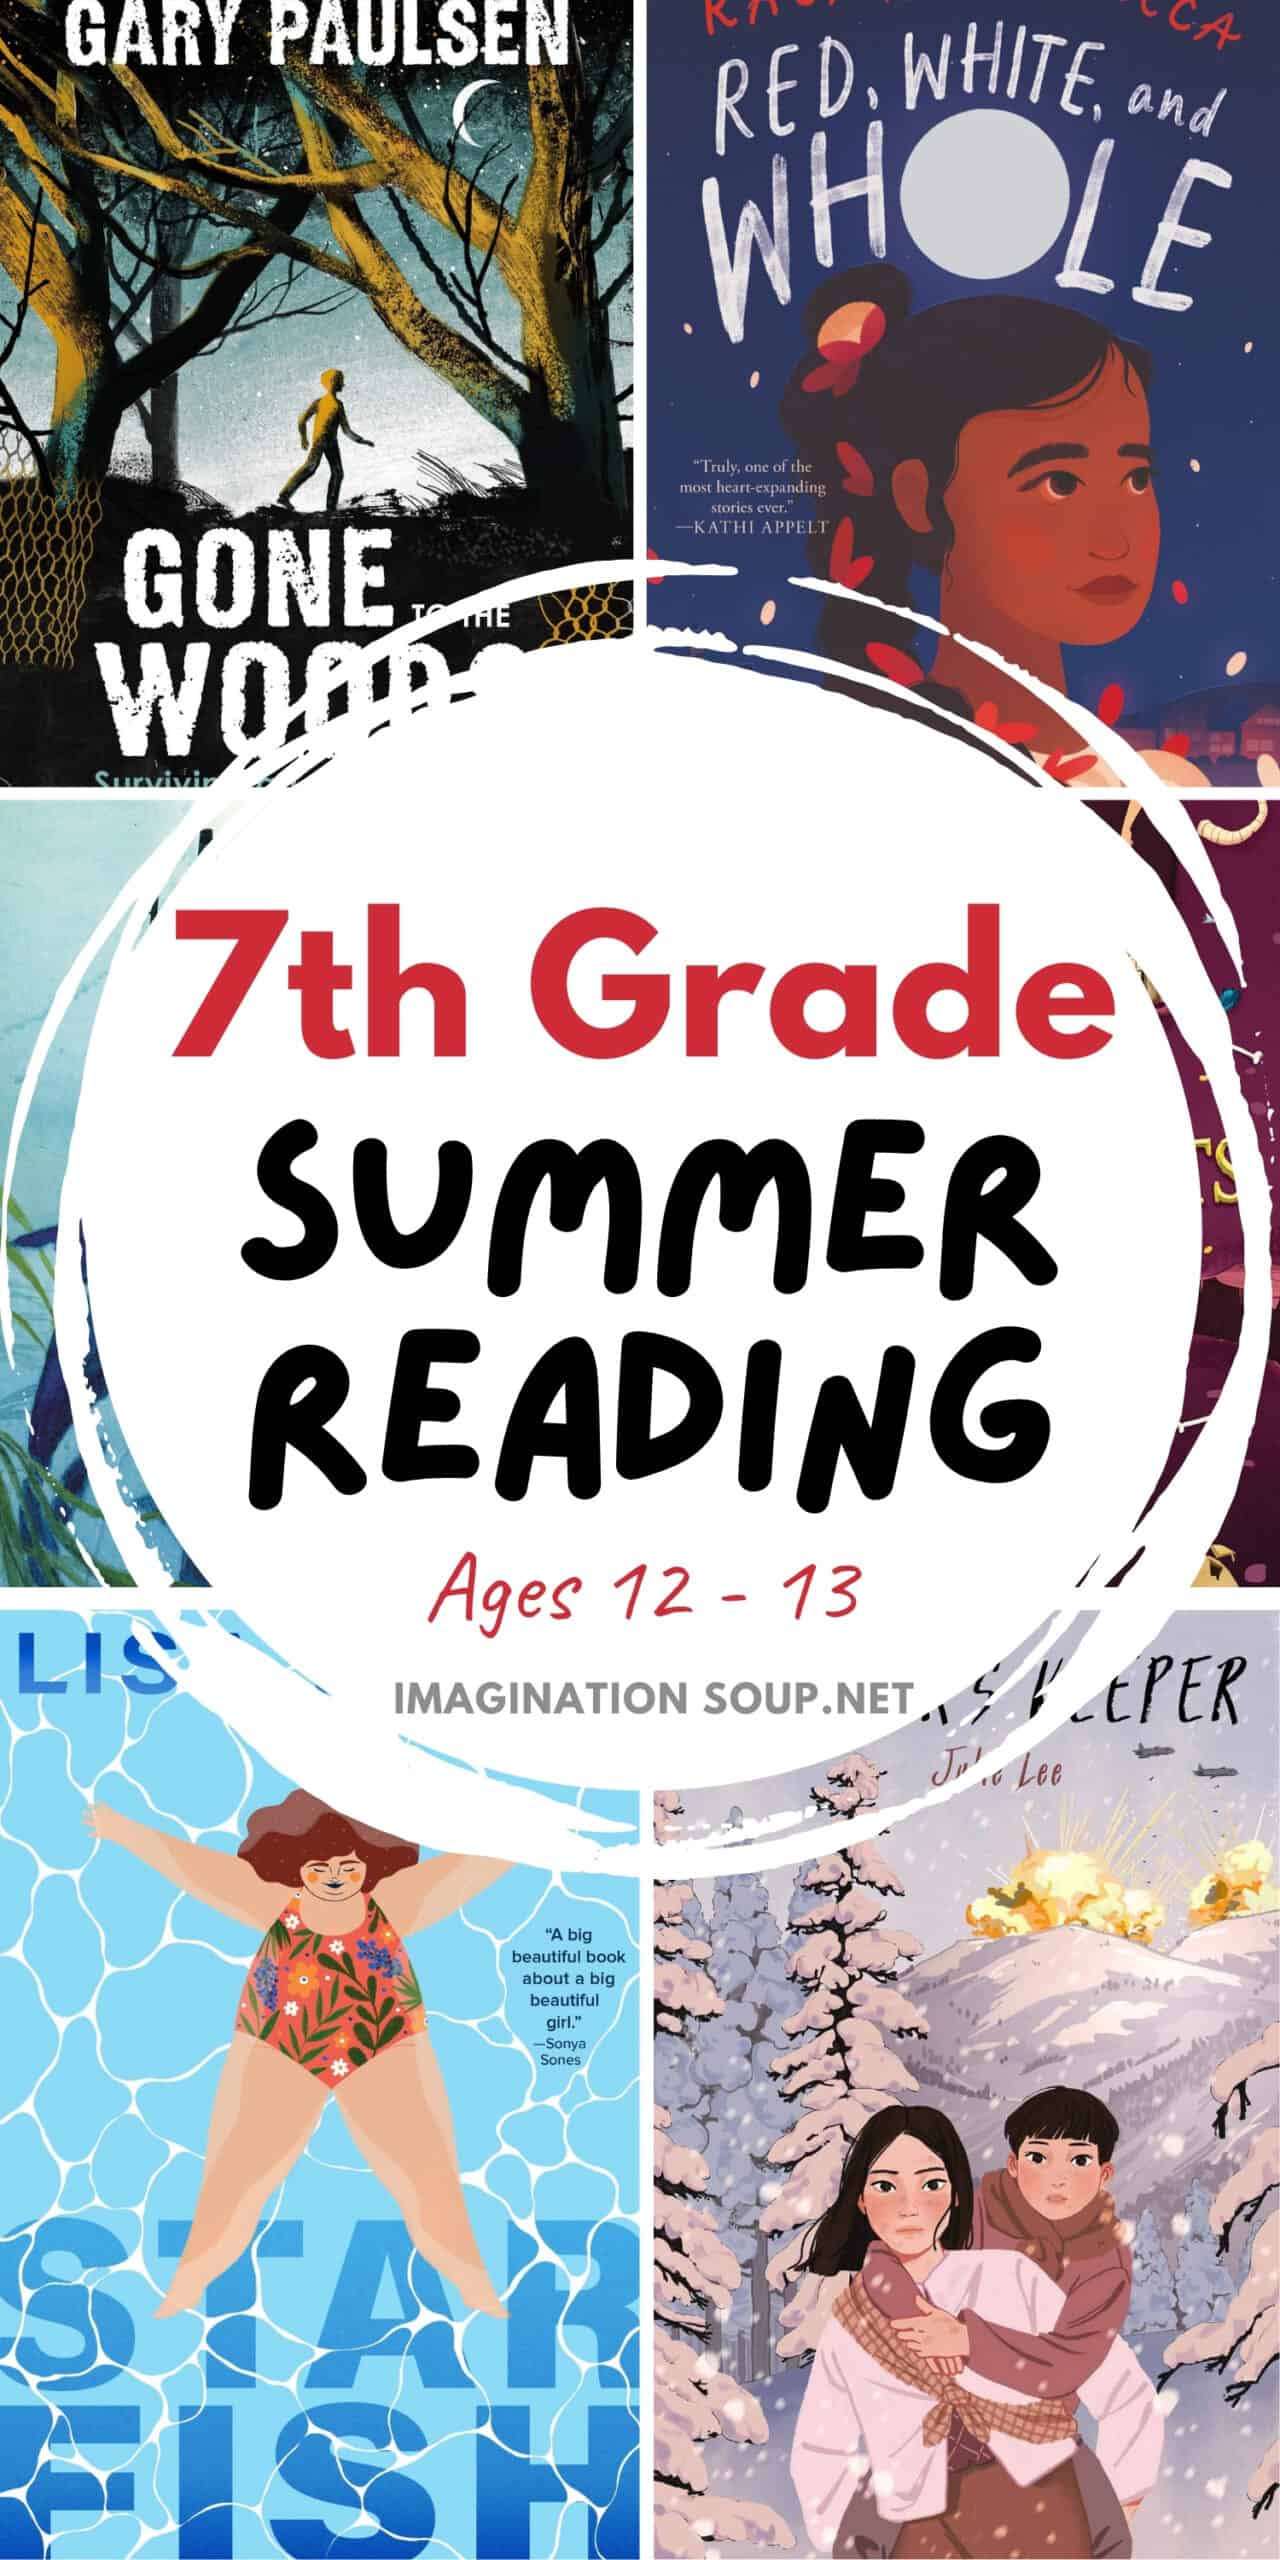 7th-grade-summer-reading-list-ages-12-13-imagination-soup